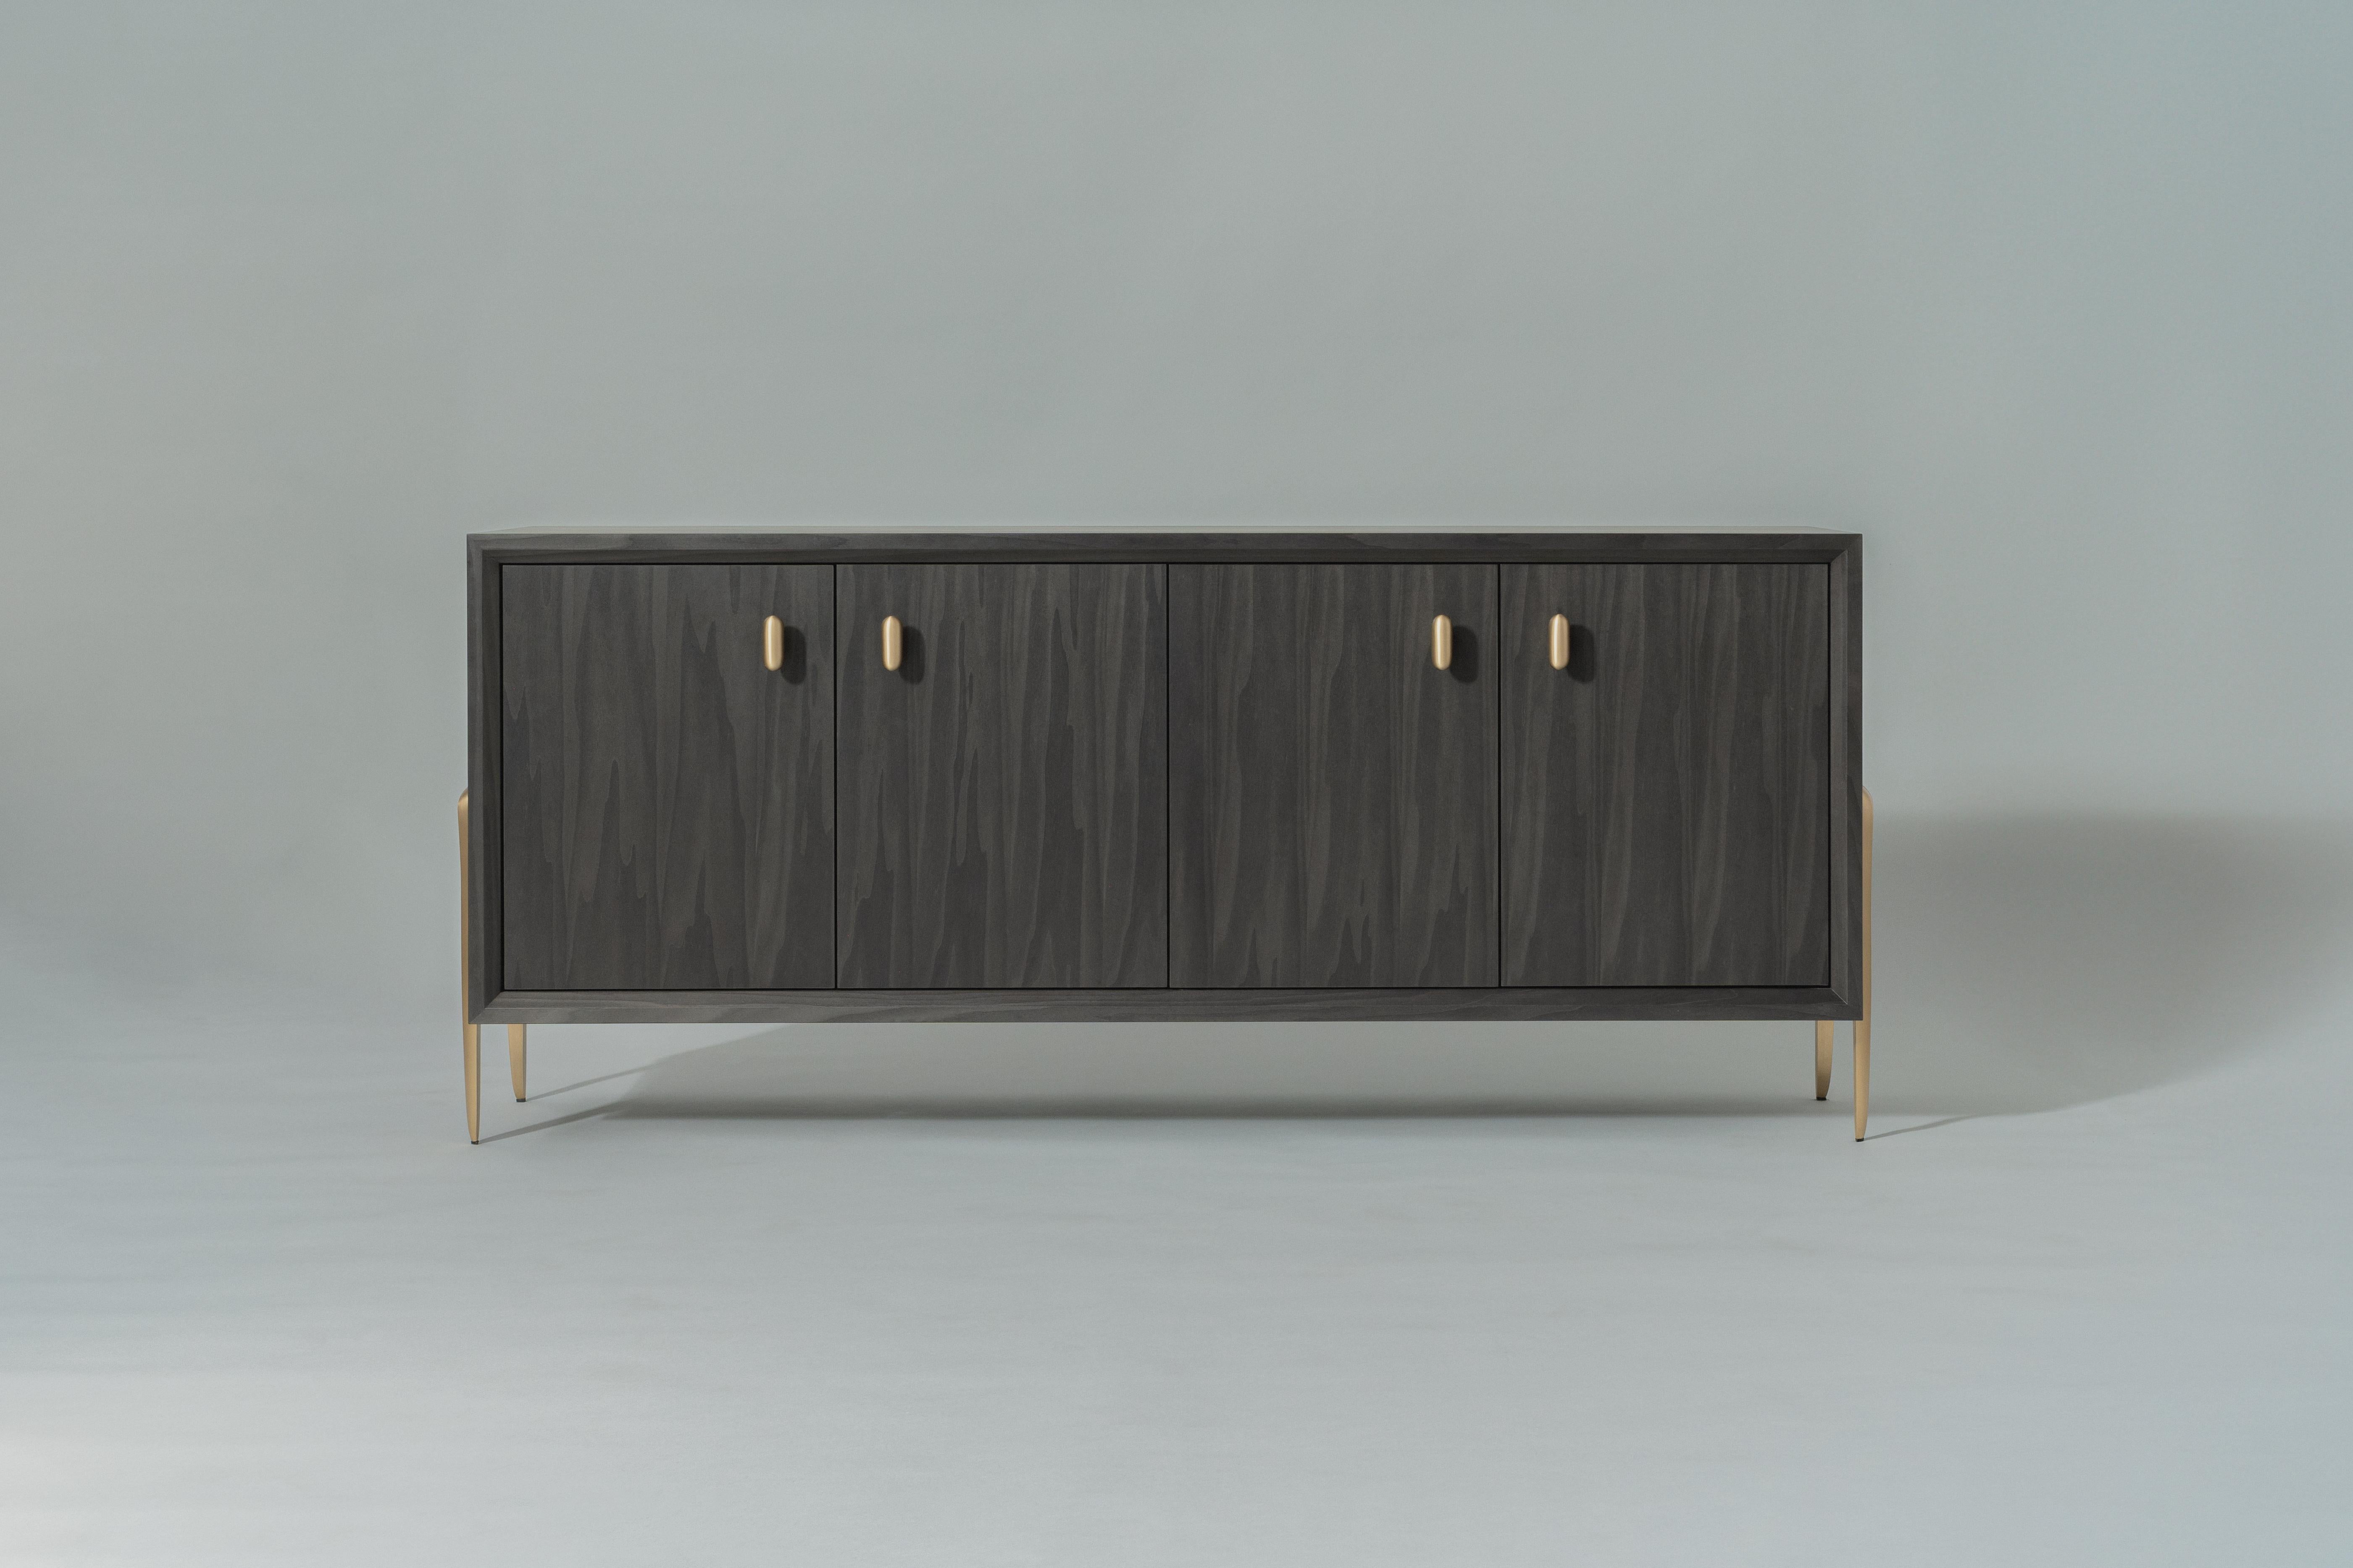 Informed by the refined craftsmanship of mid-century Italian design, the Serge Cabinet features sculptural two-legged brackets, with a gently tapered silhouette and articulated edge. Nuanced millwork - beveled along the interior frame, with four